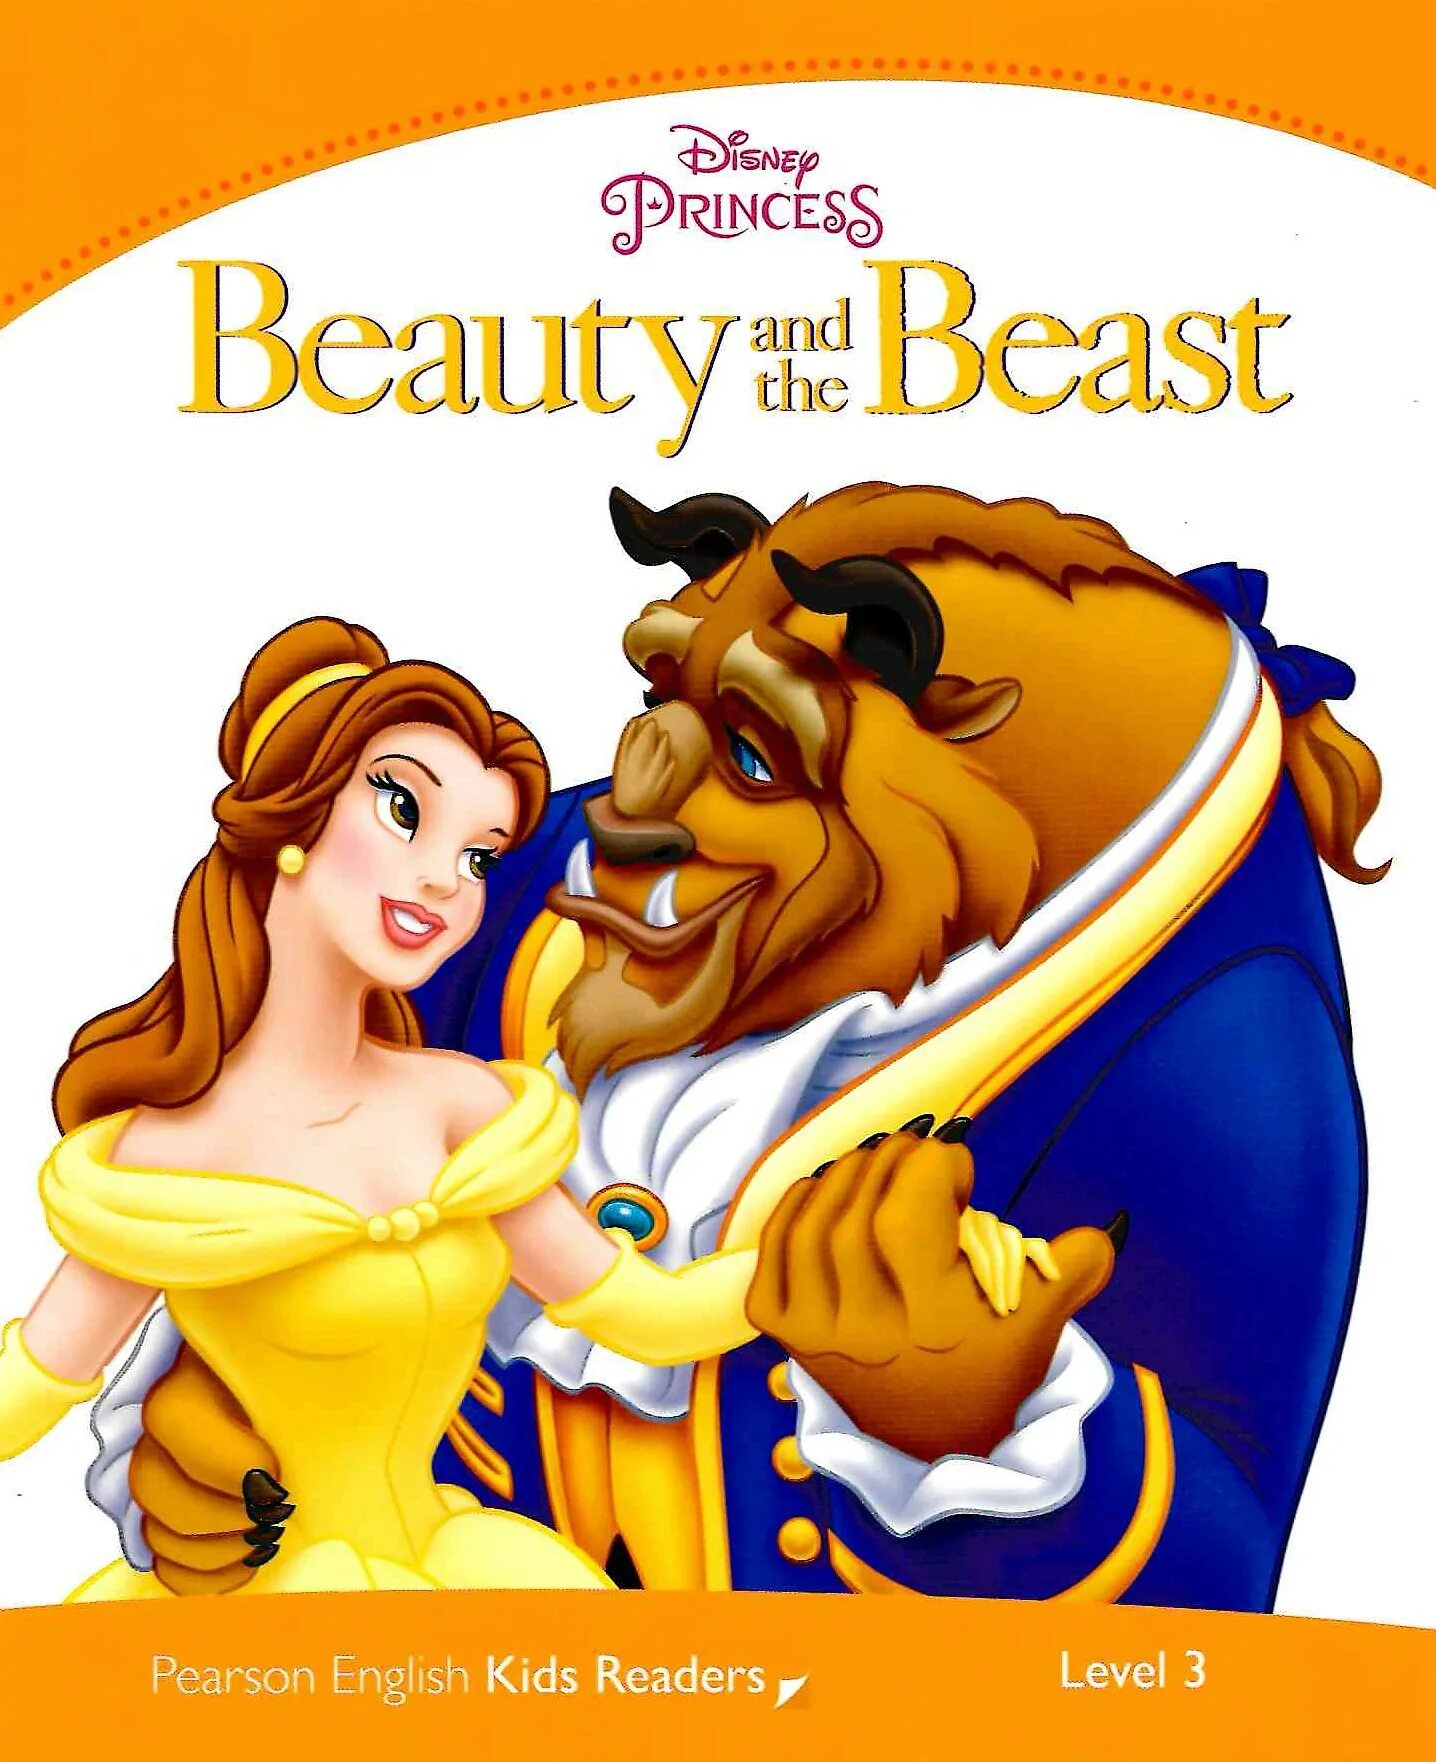 Beauty and the Beast book. Beauty and the Beast книга. Beauty and the Beast Disney book.